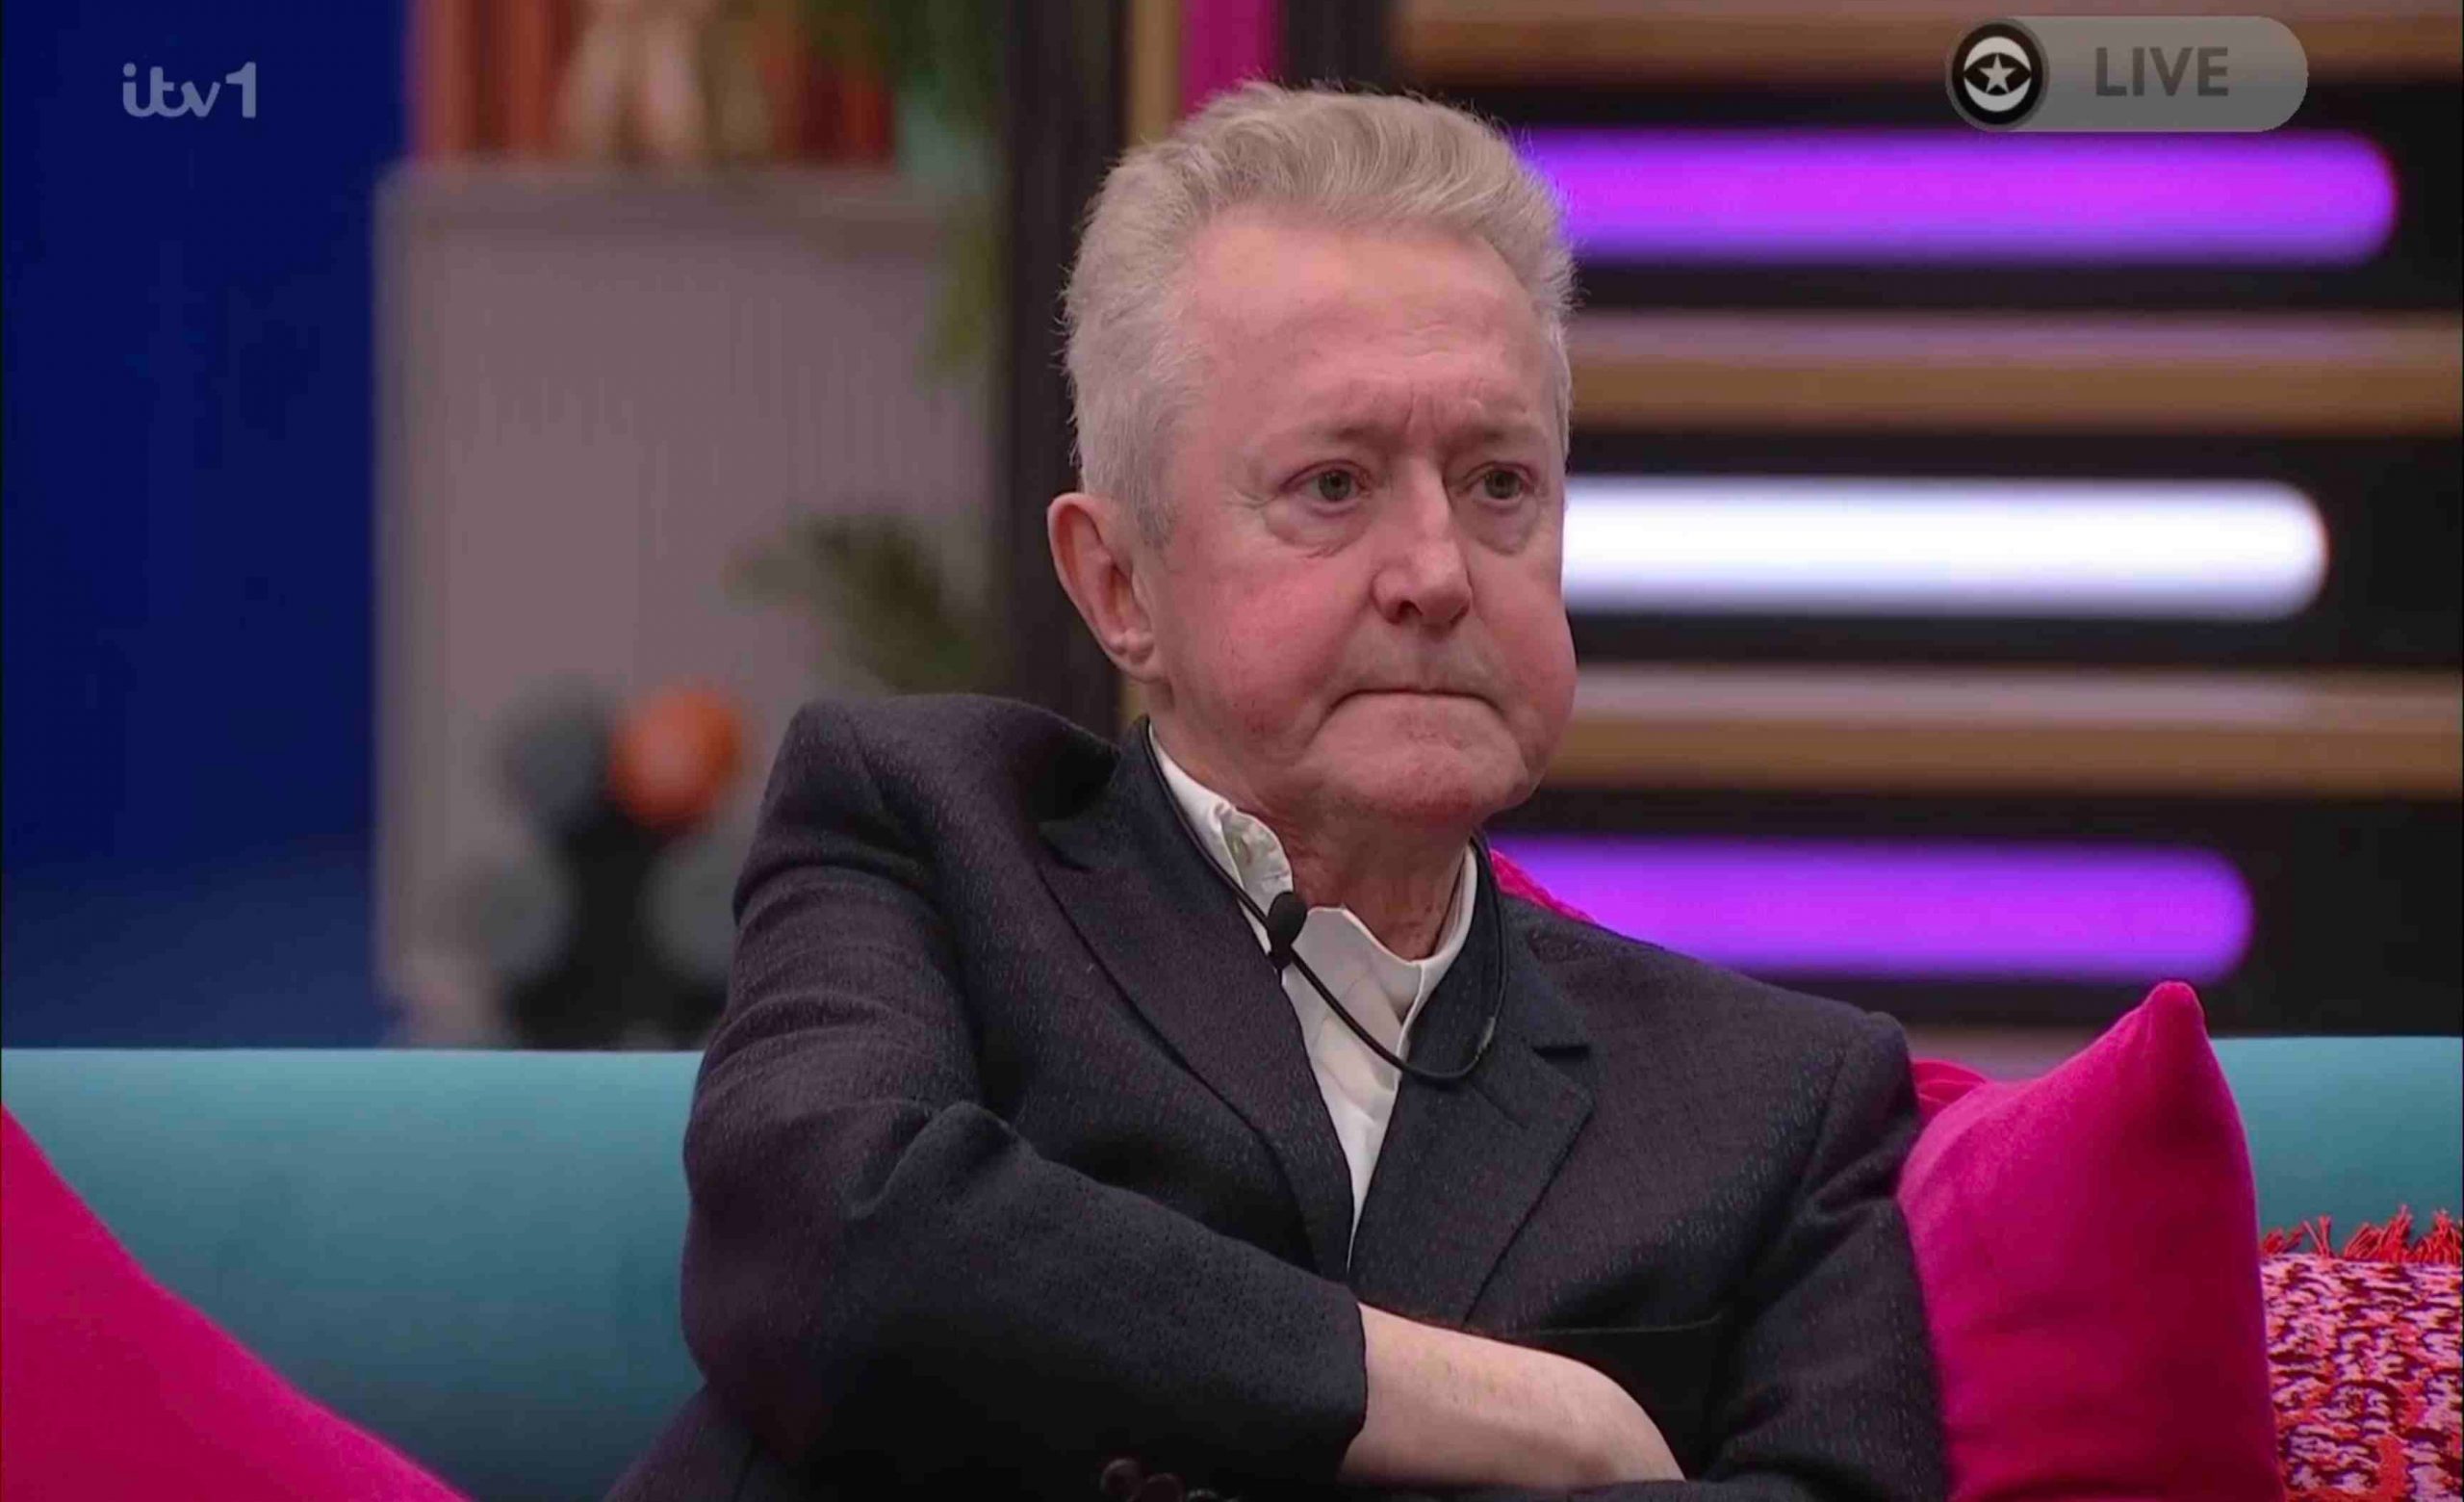 CBB in fix row as fans claim ‘ITV found a way to keep Louis Walsh safe’ – and predict who’ll be axed in brutal scenes